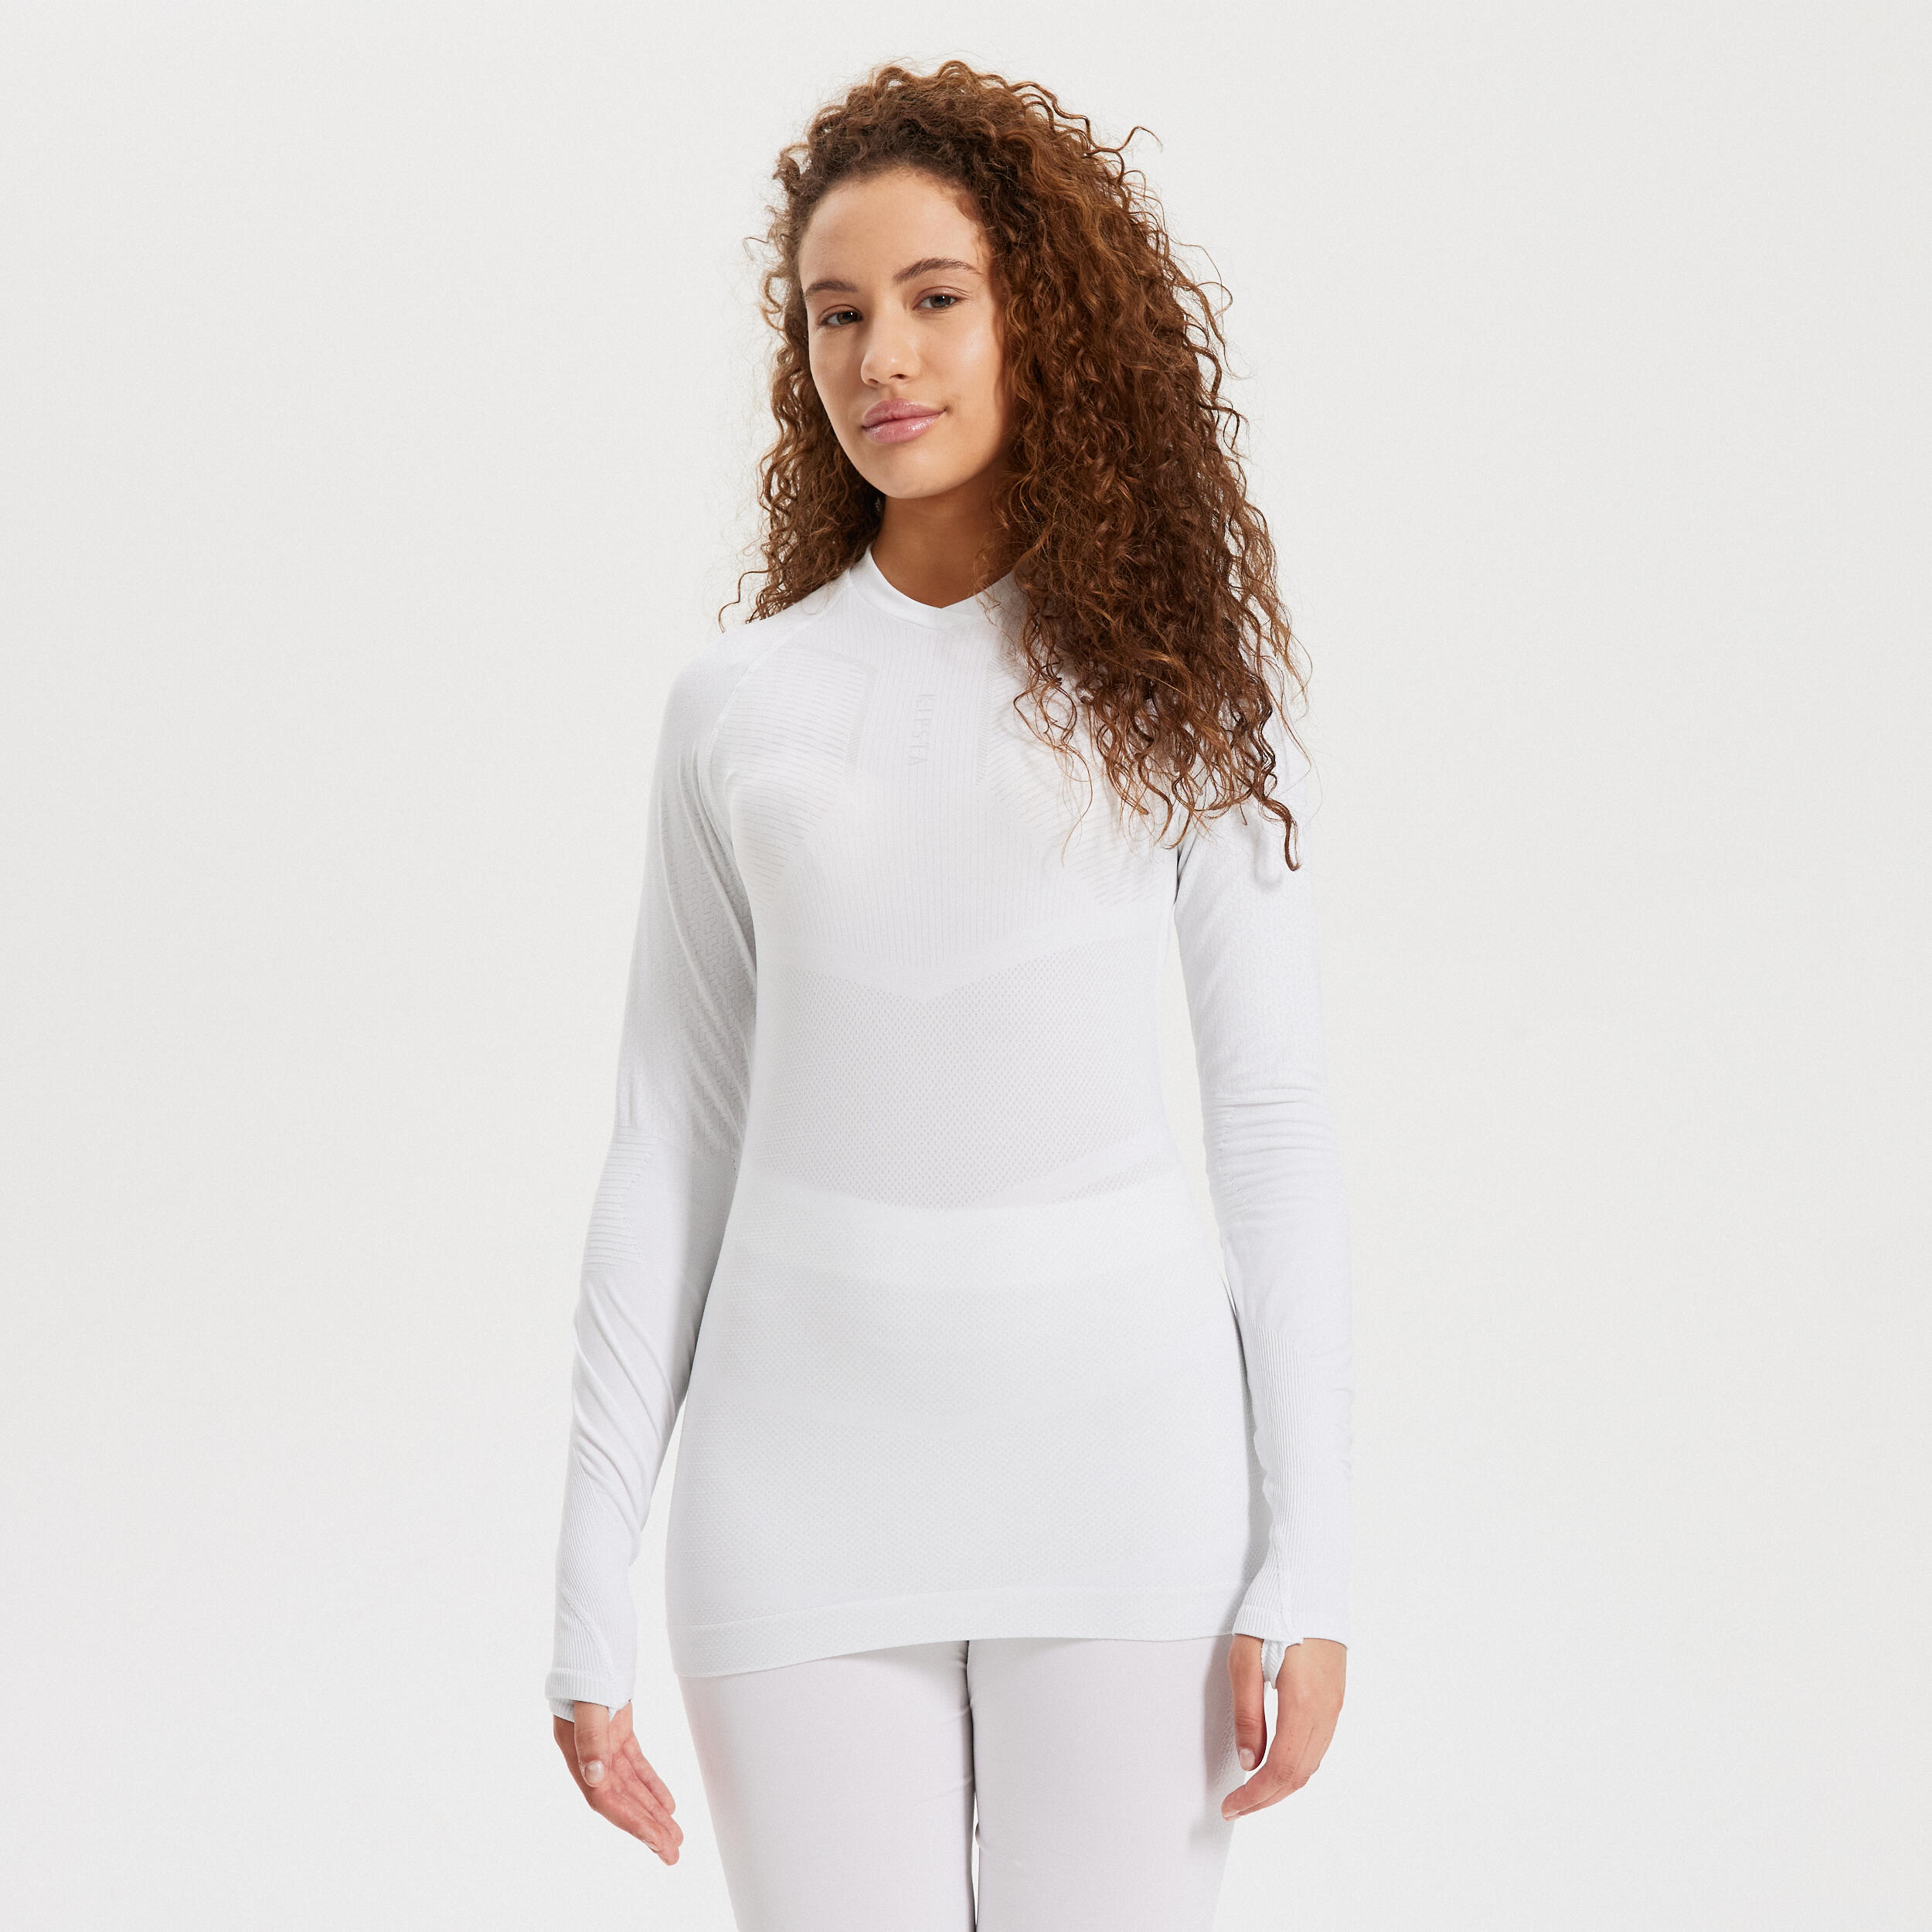 LS Thermal Base Layer Top - Keepdry 500 White